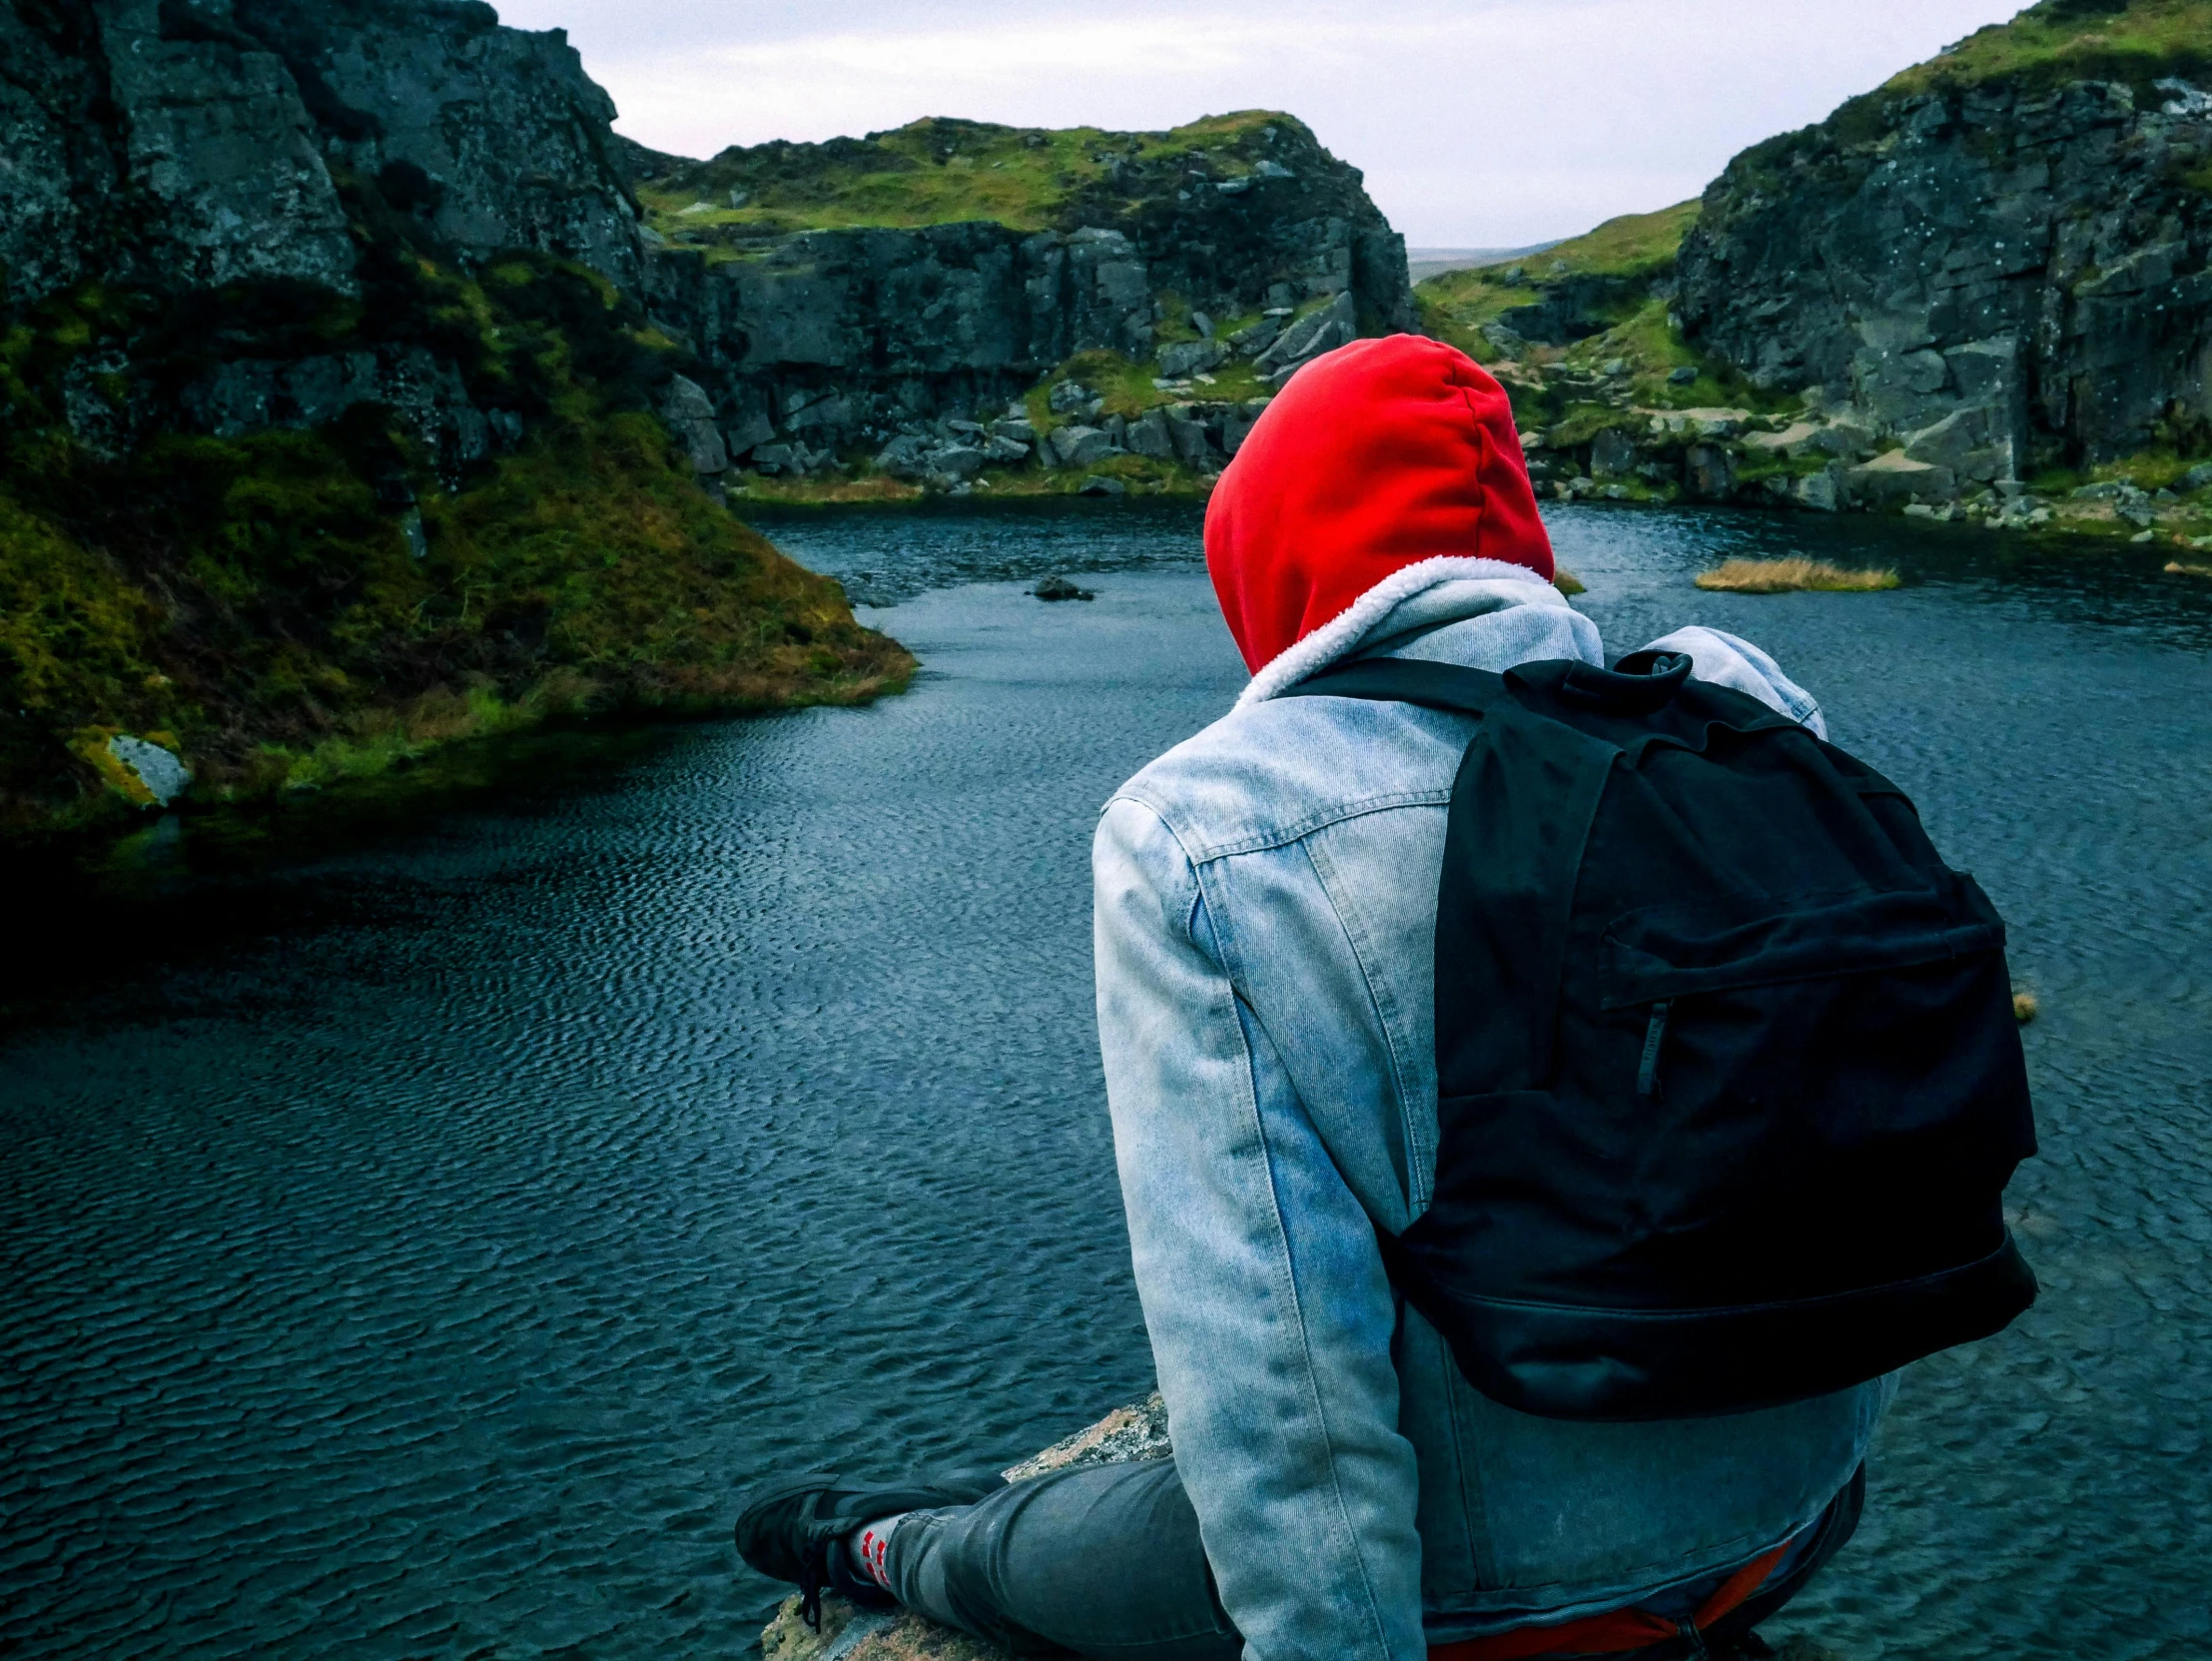 a person sitting on a rock overlooking a body of water, happening, red backwards cap, icelandic valley, sitting at a pond, traveling clothes